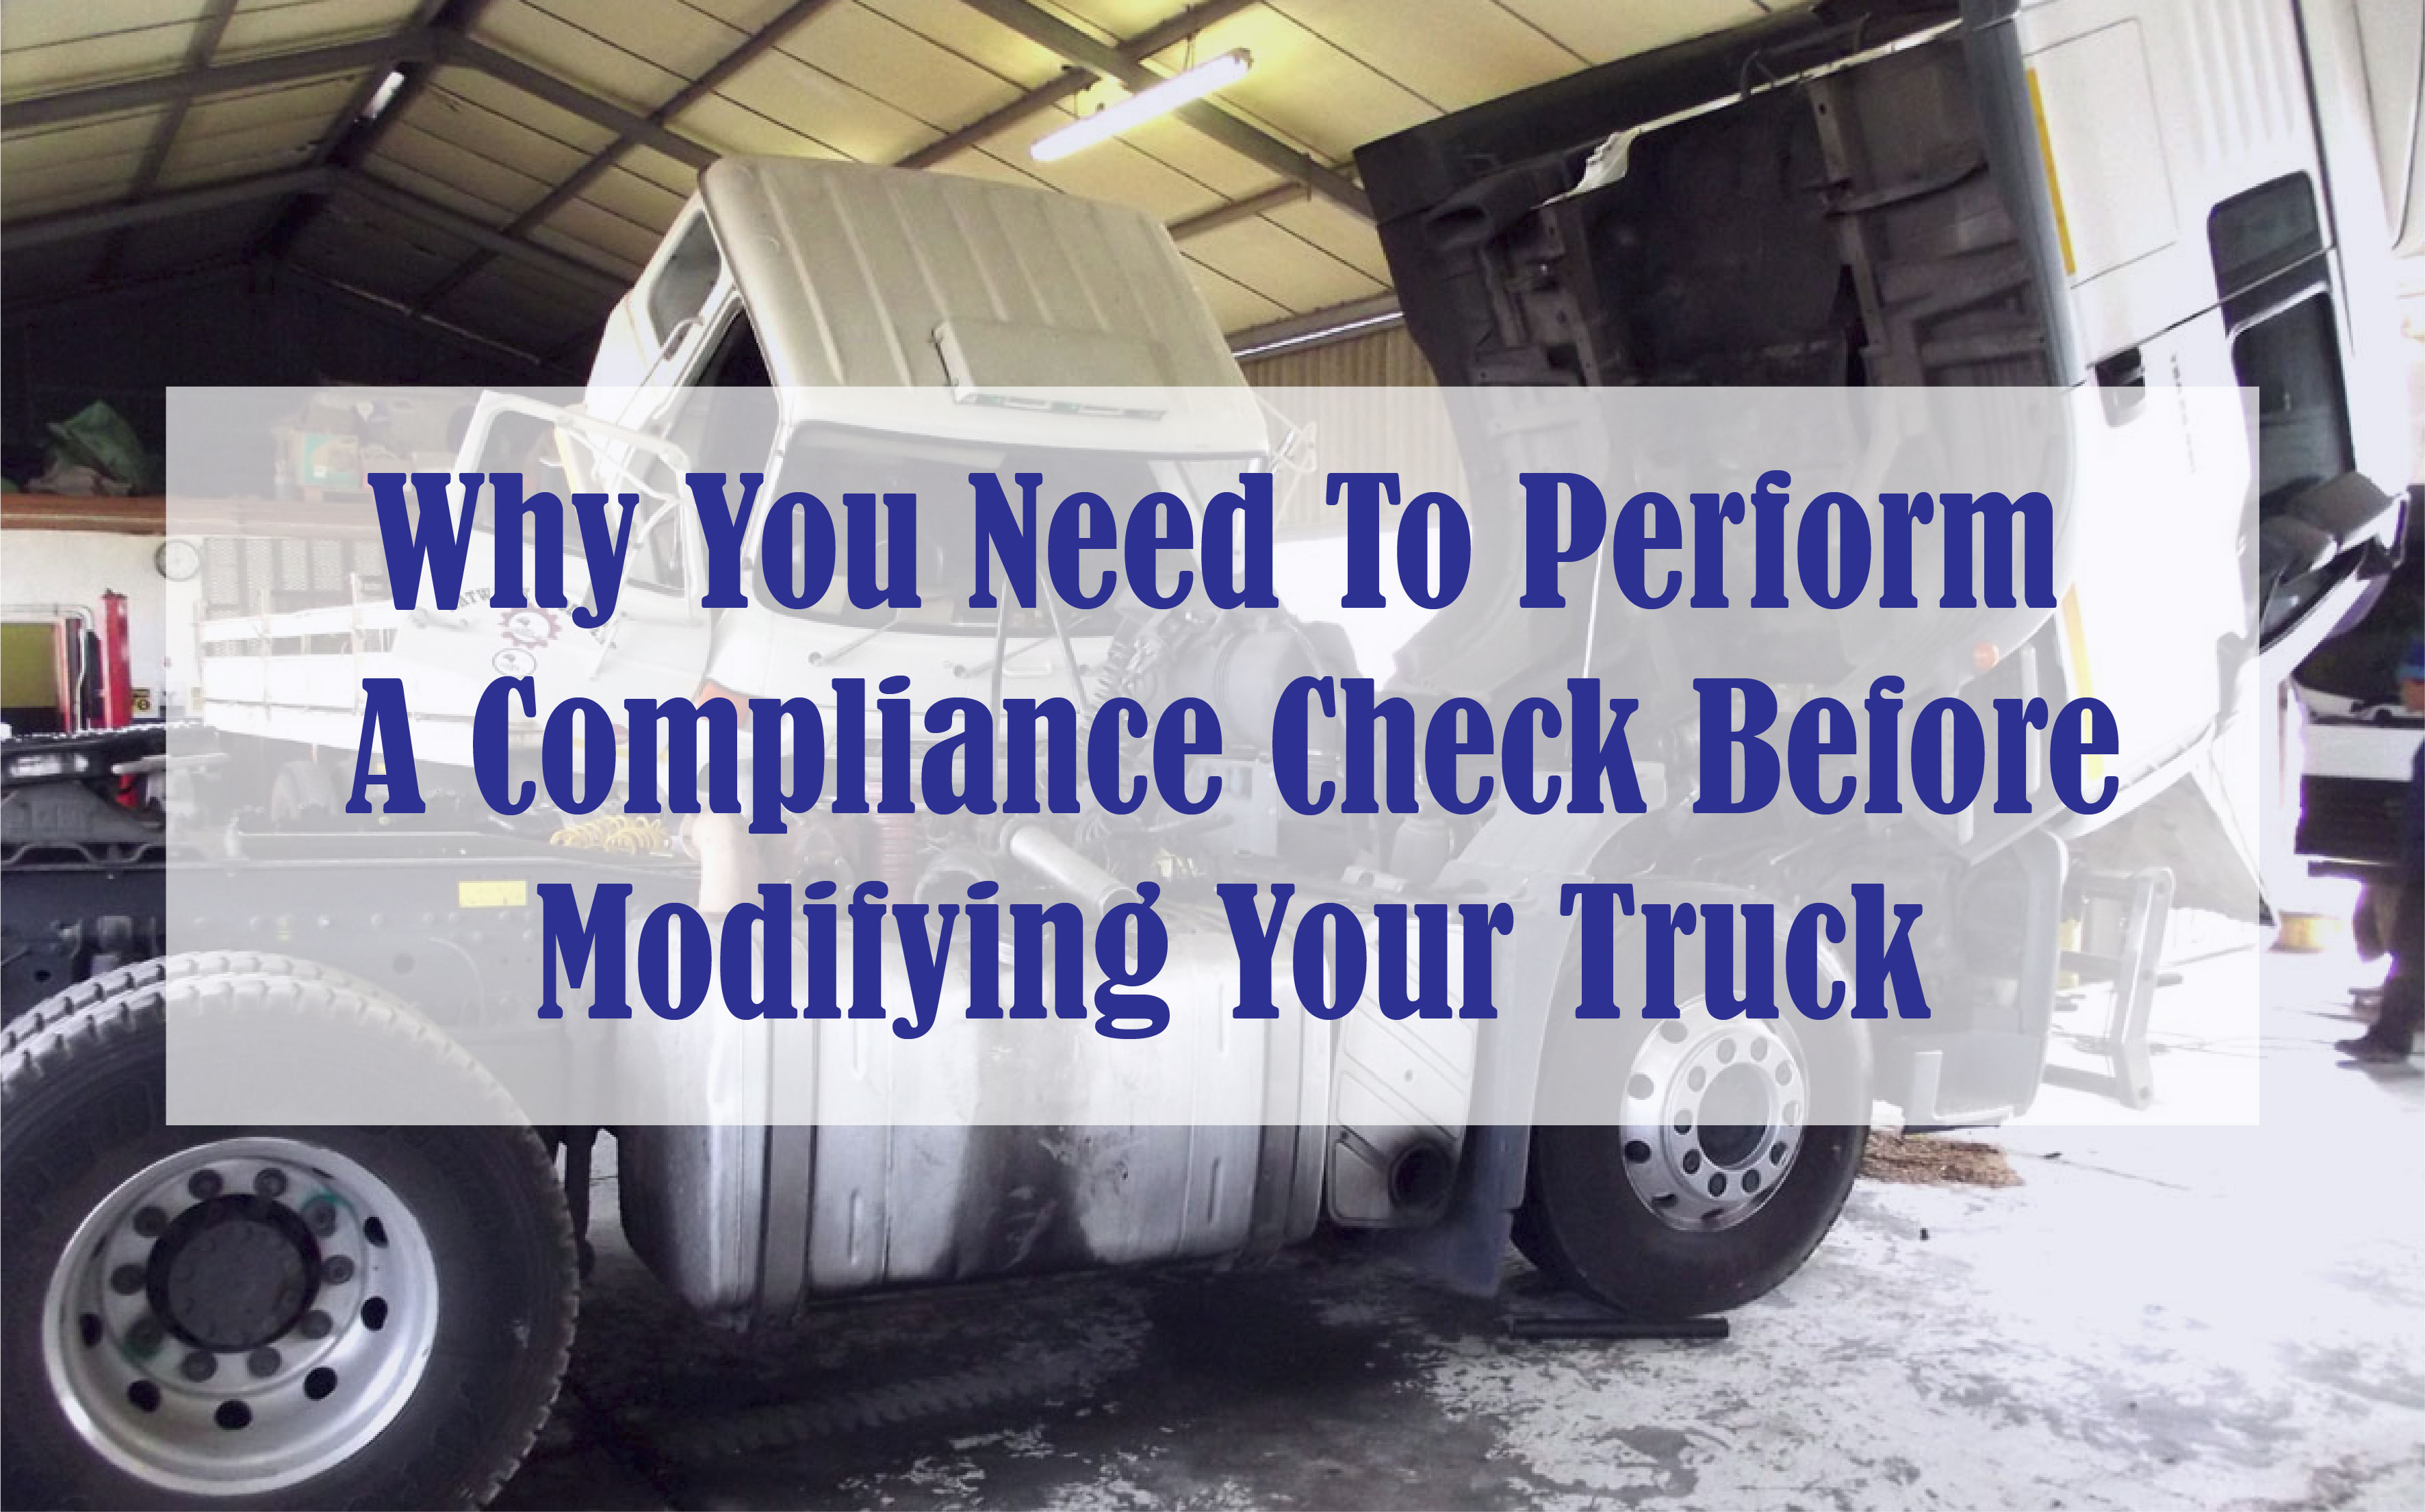 Why-you-need-to-perform-a-compliance-check-before-modifying-your-truck